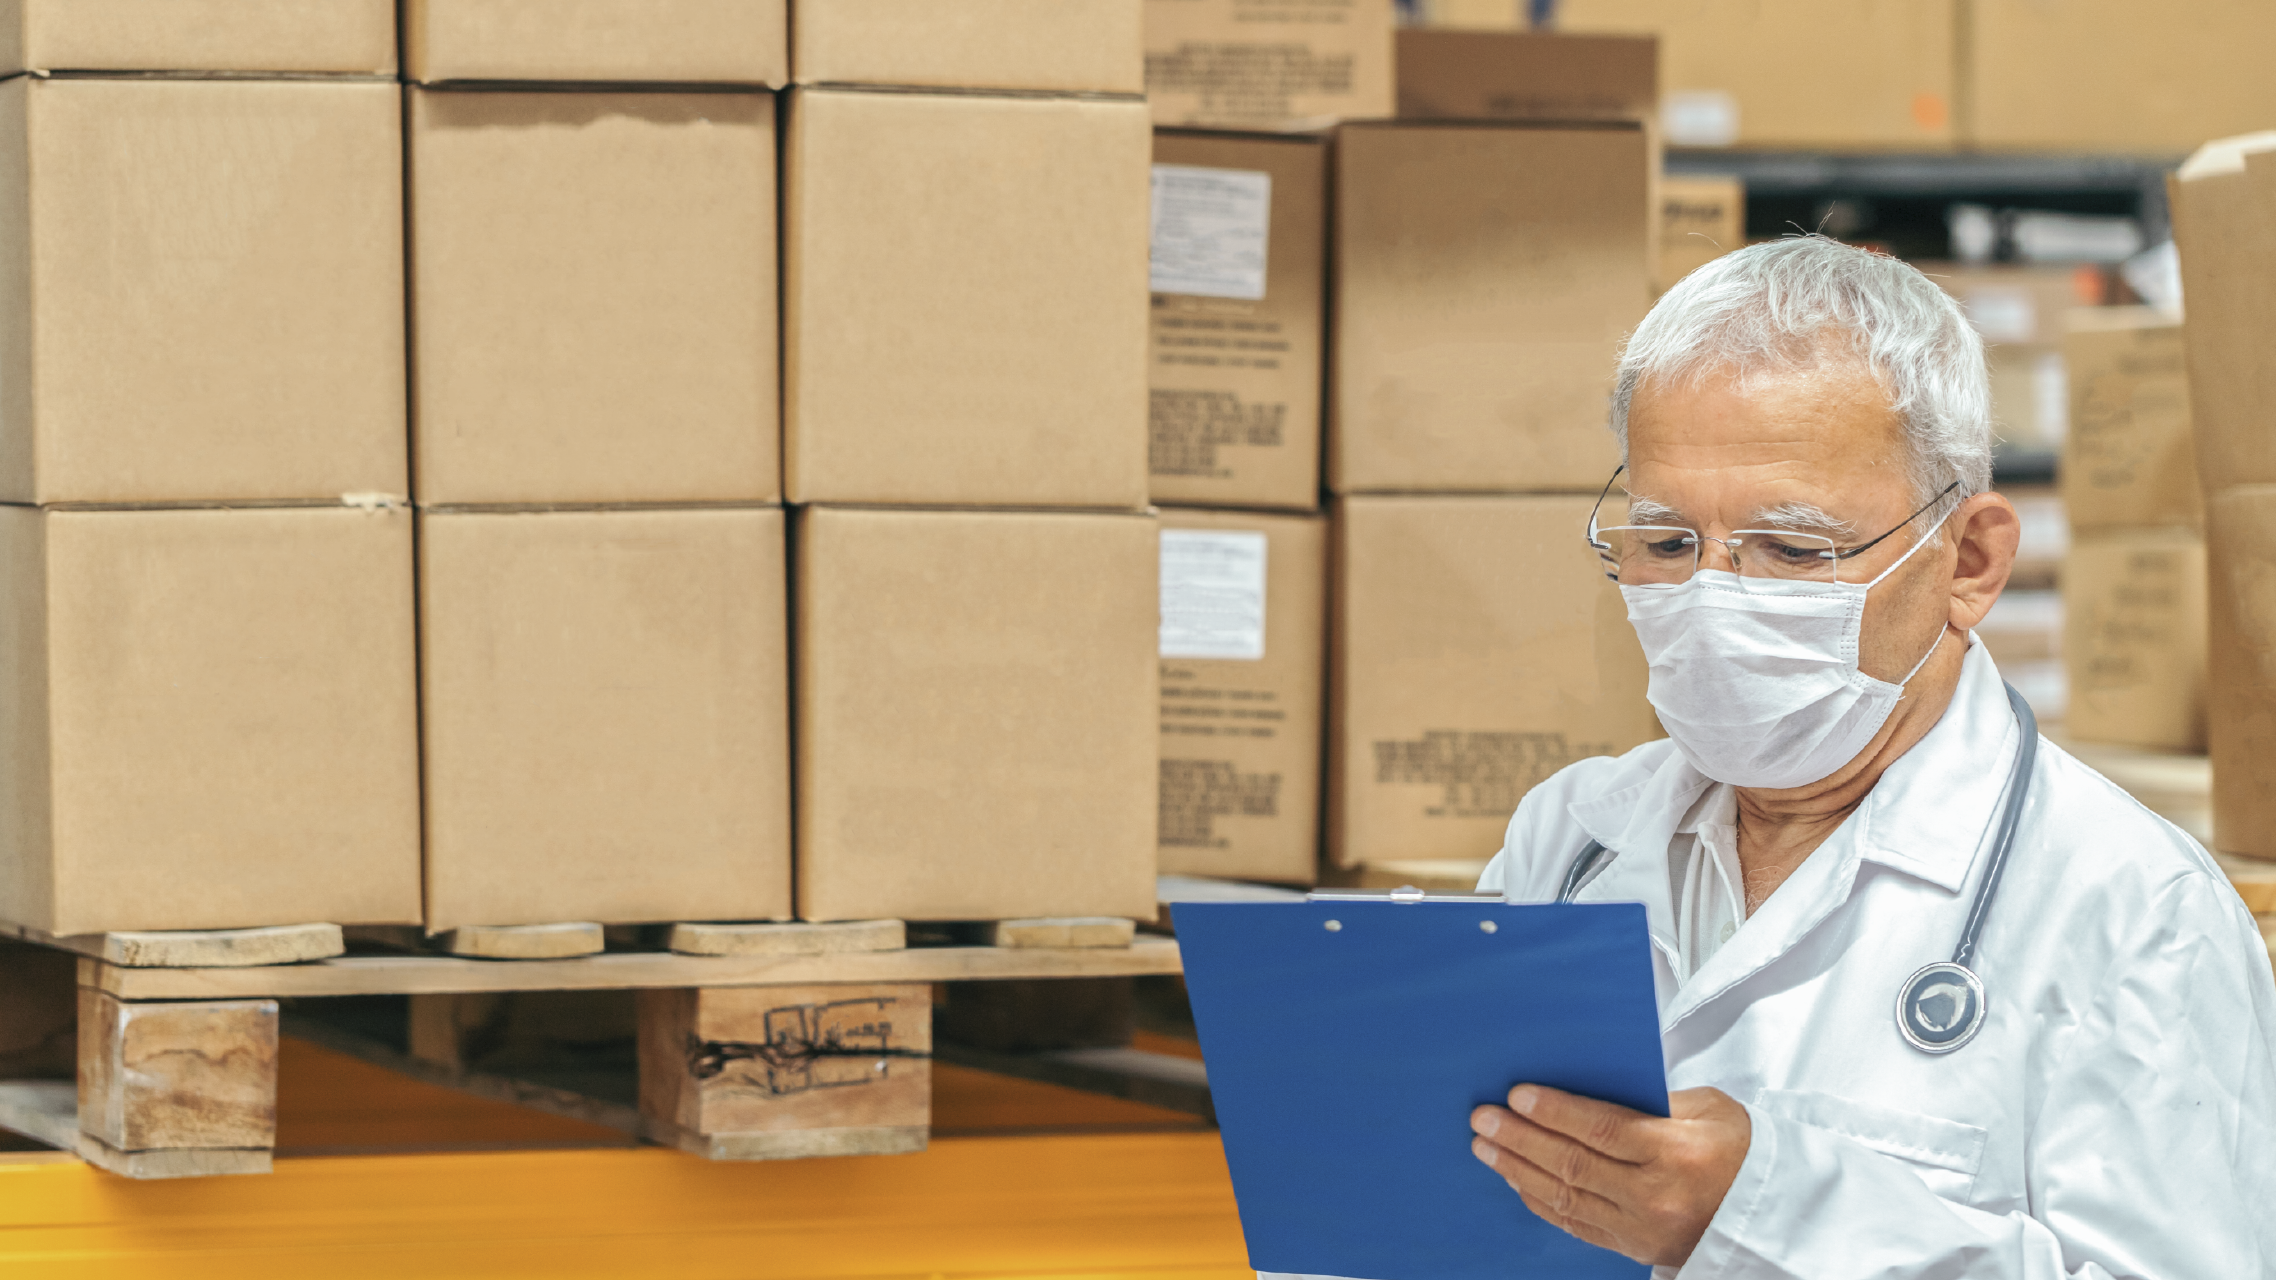 Doctor checking medical supplies in a warehouse